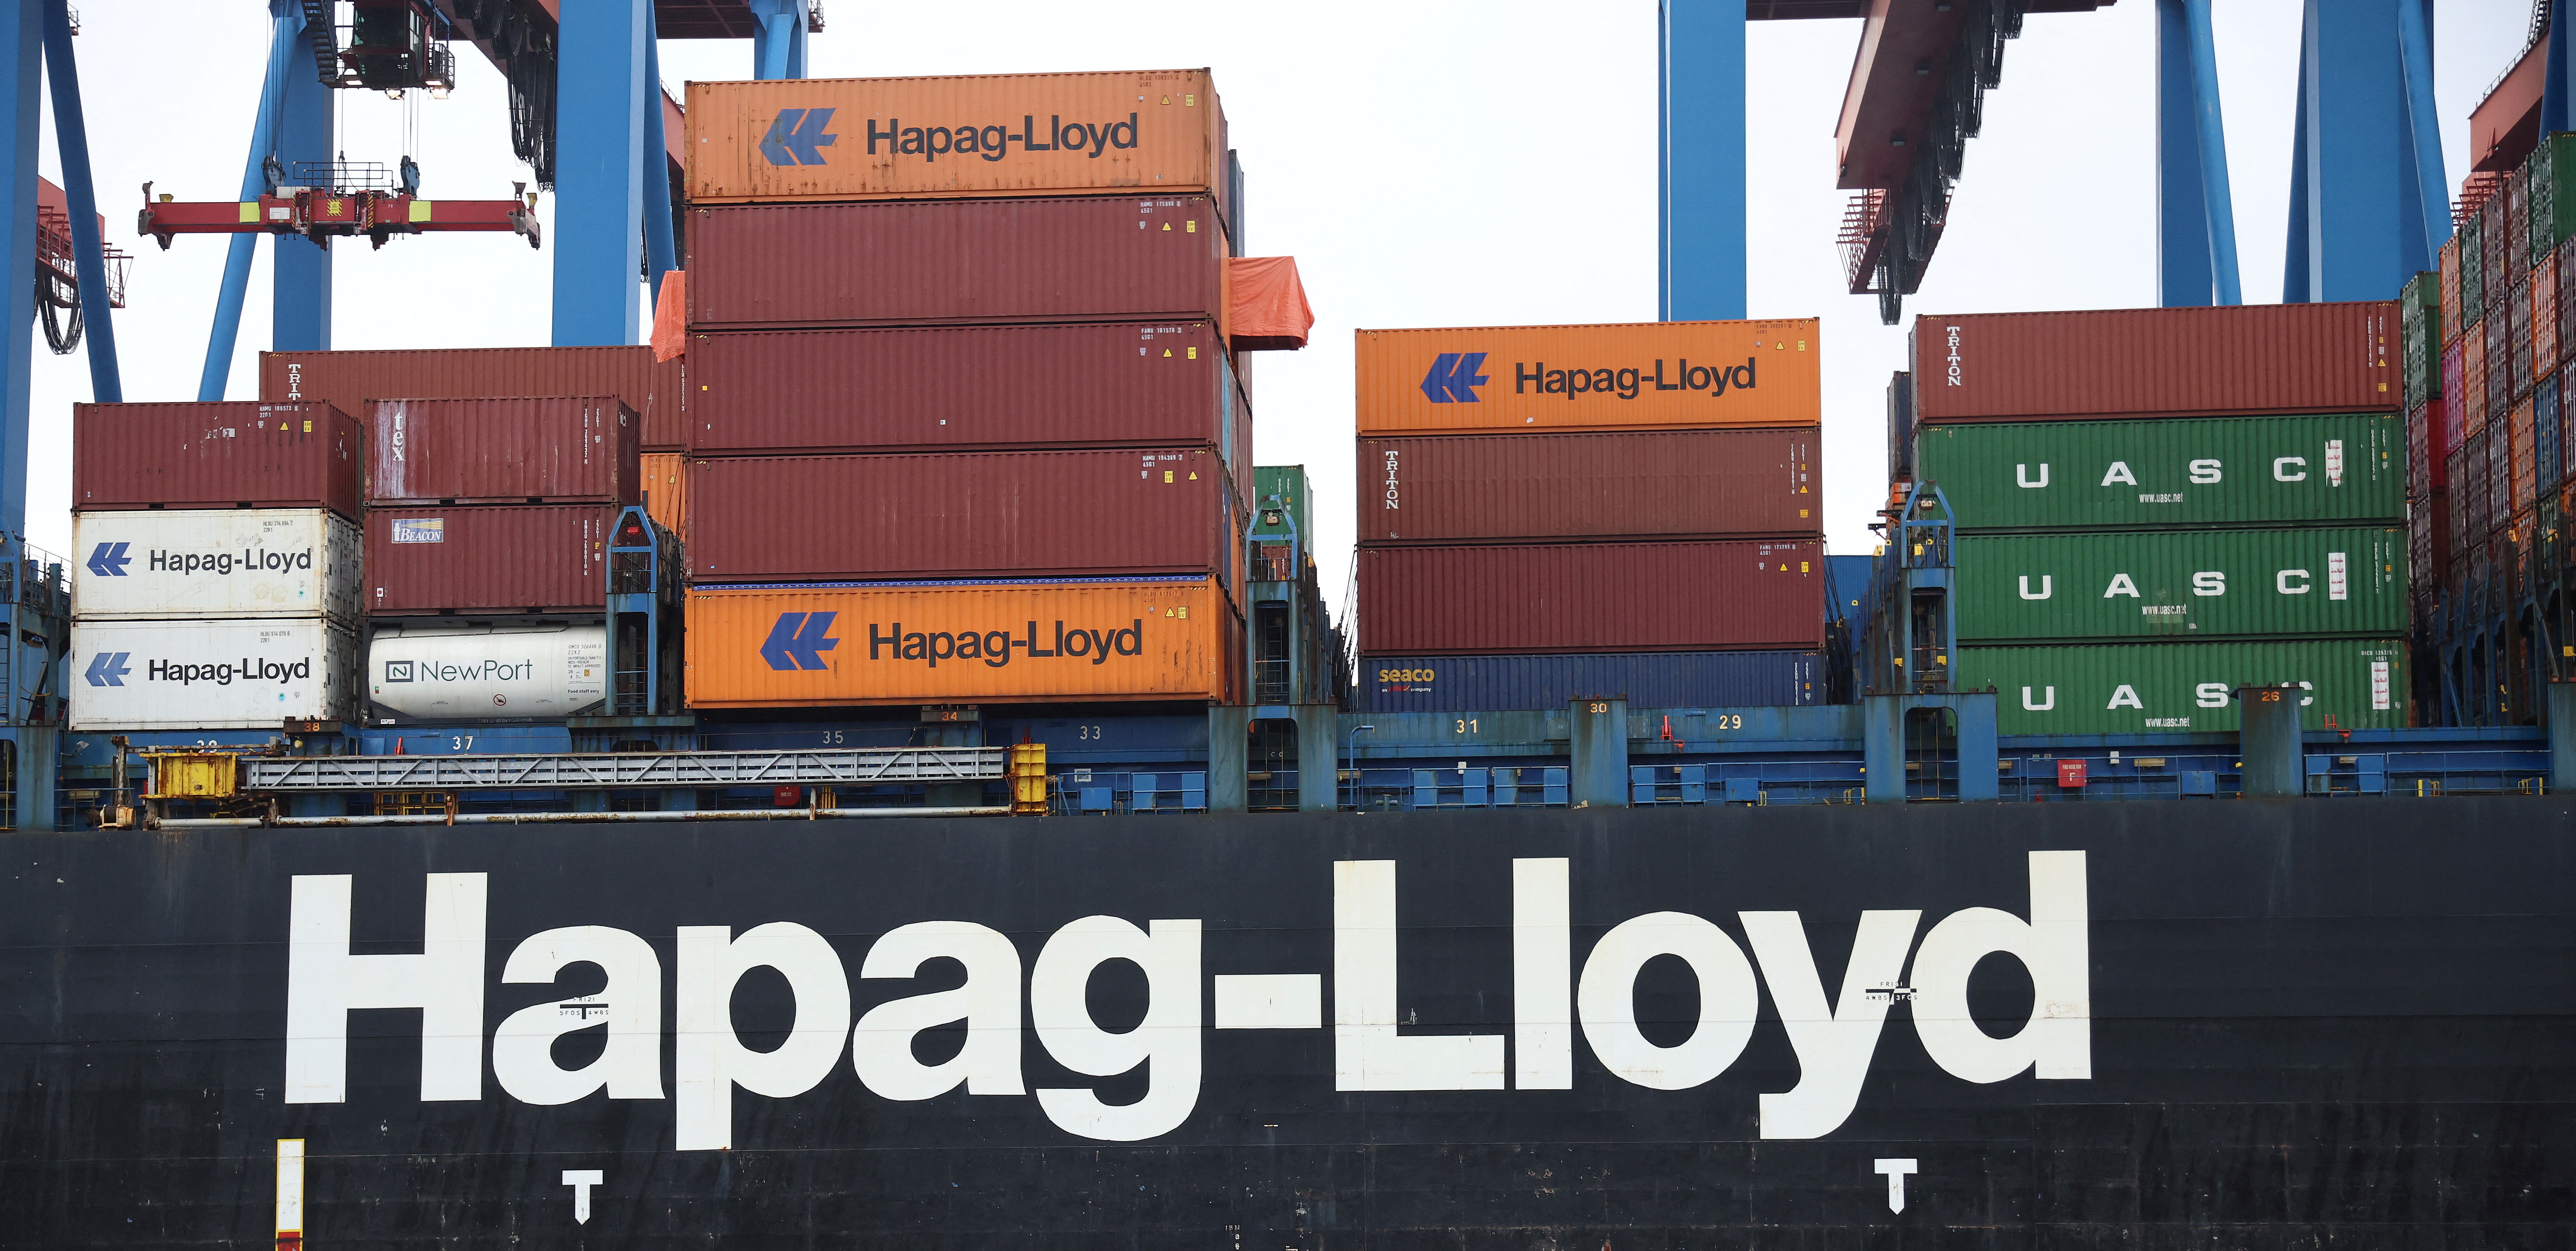 Containers are unloaded from the Hapag-Lloyd container ship Chacabuco at the HHLA Container Terminal Altenwerder on the River Elbe in Hamburg, Germany